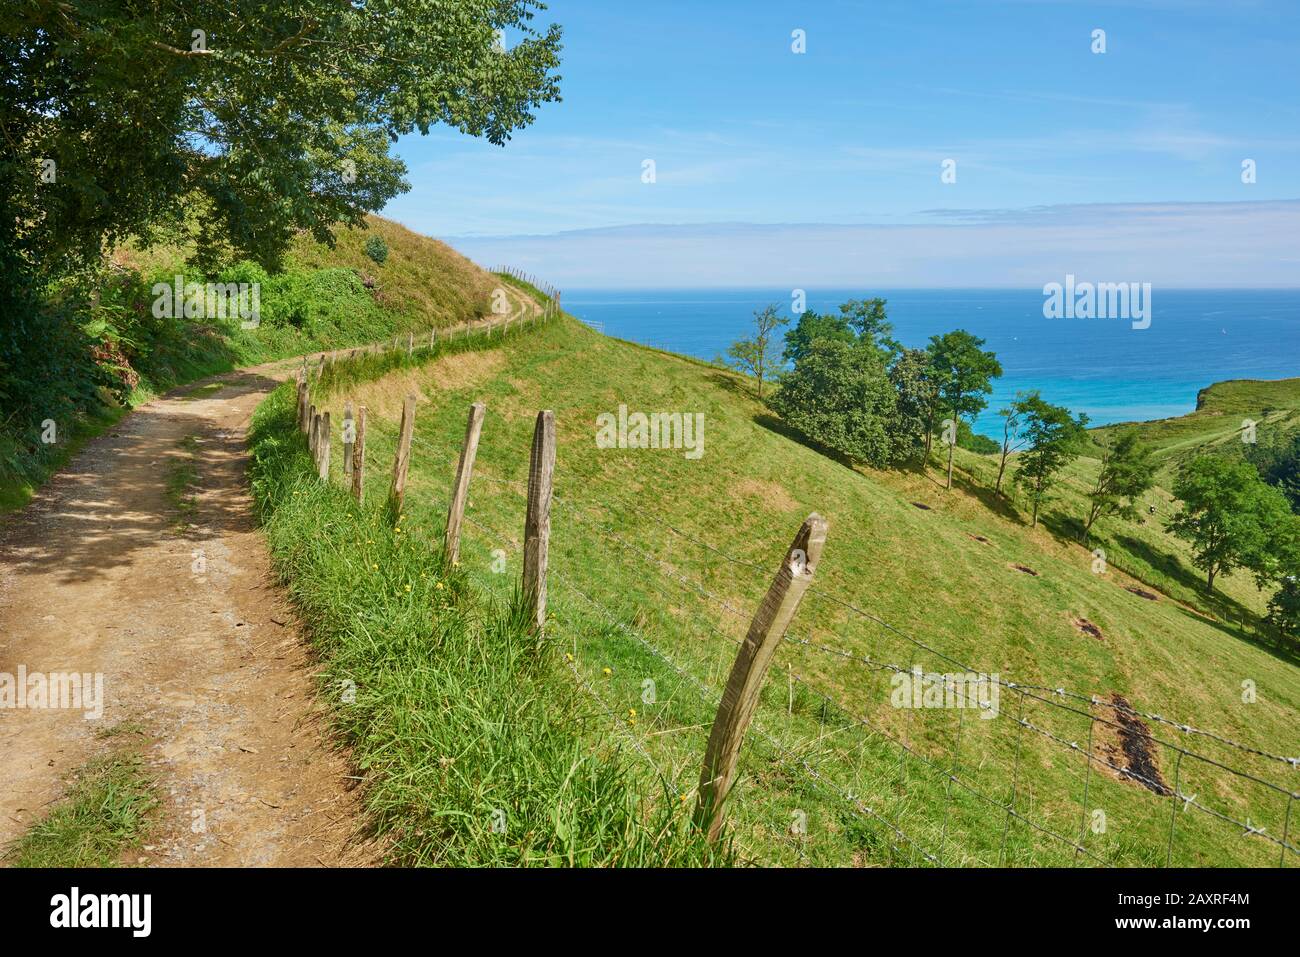 Landscape, footpath, Way of St. James, Geopark Costa Vasca between Zumaia and Itxaspe, Basque Country, Spain Stock Photo